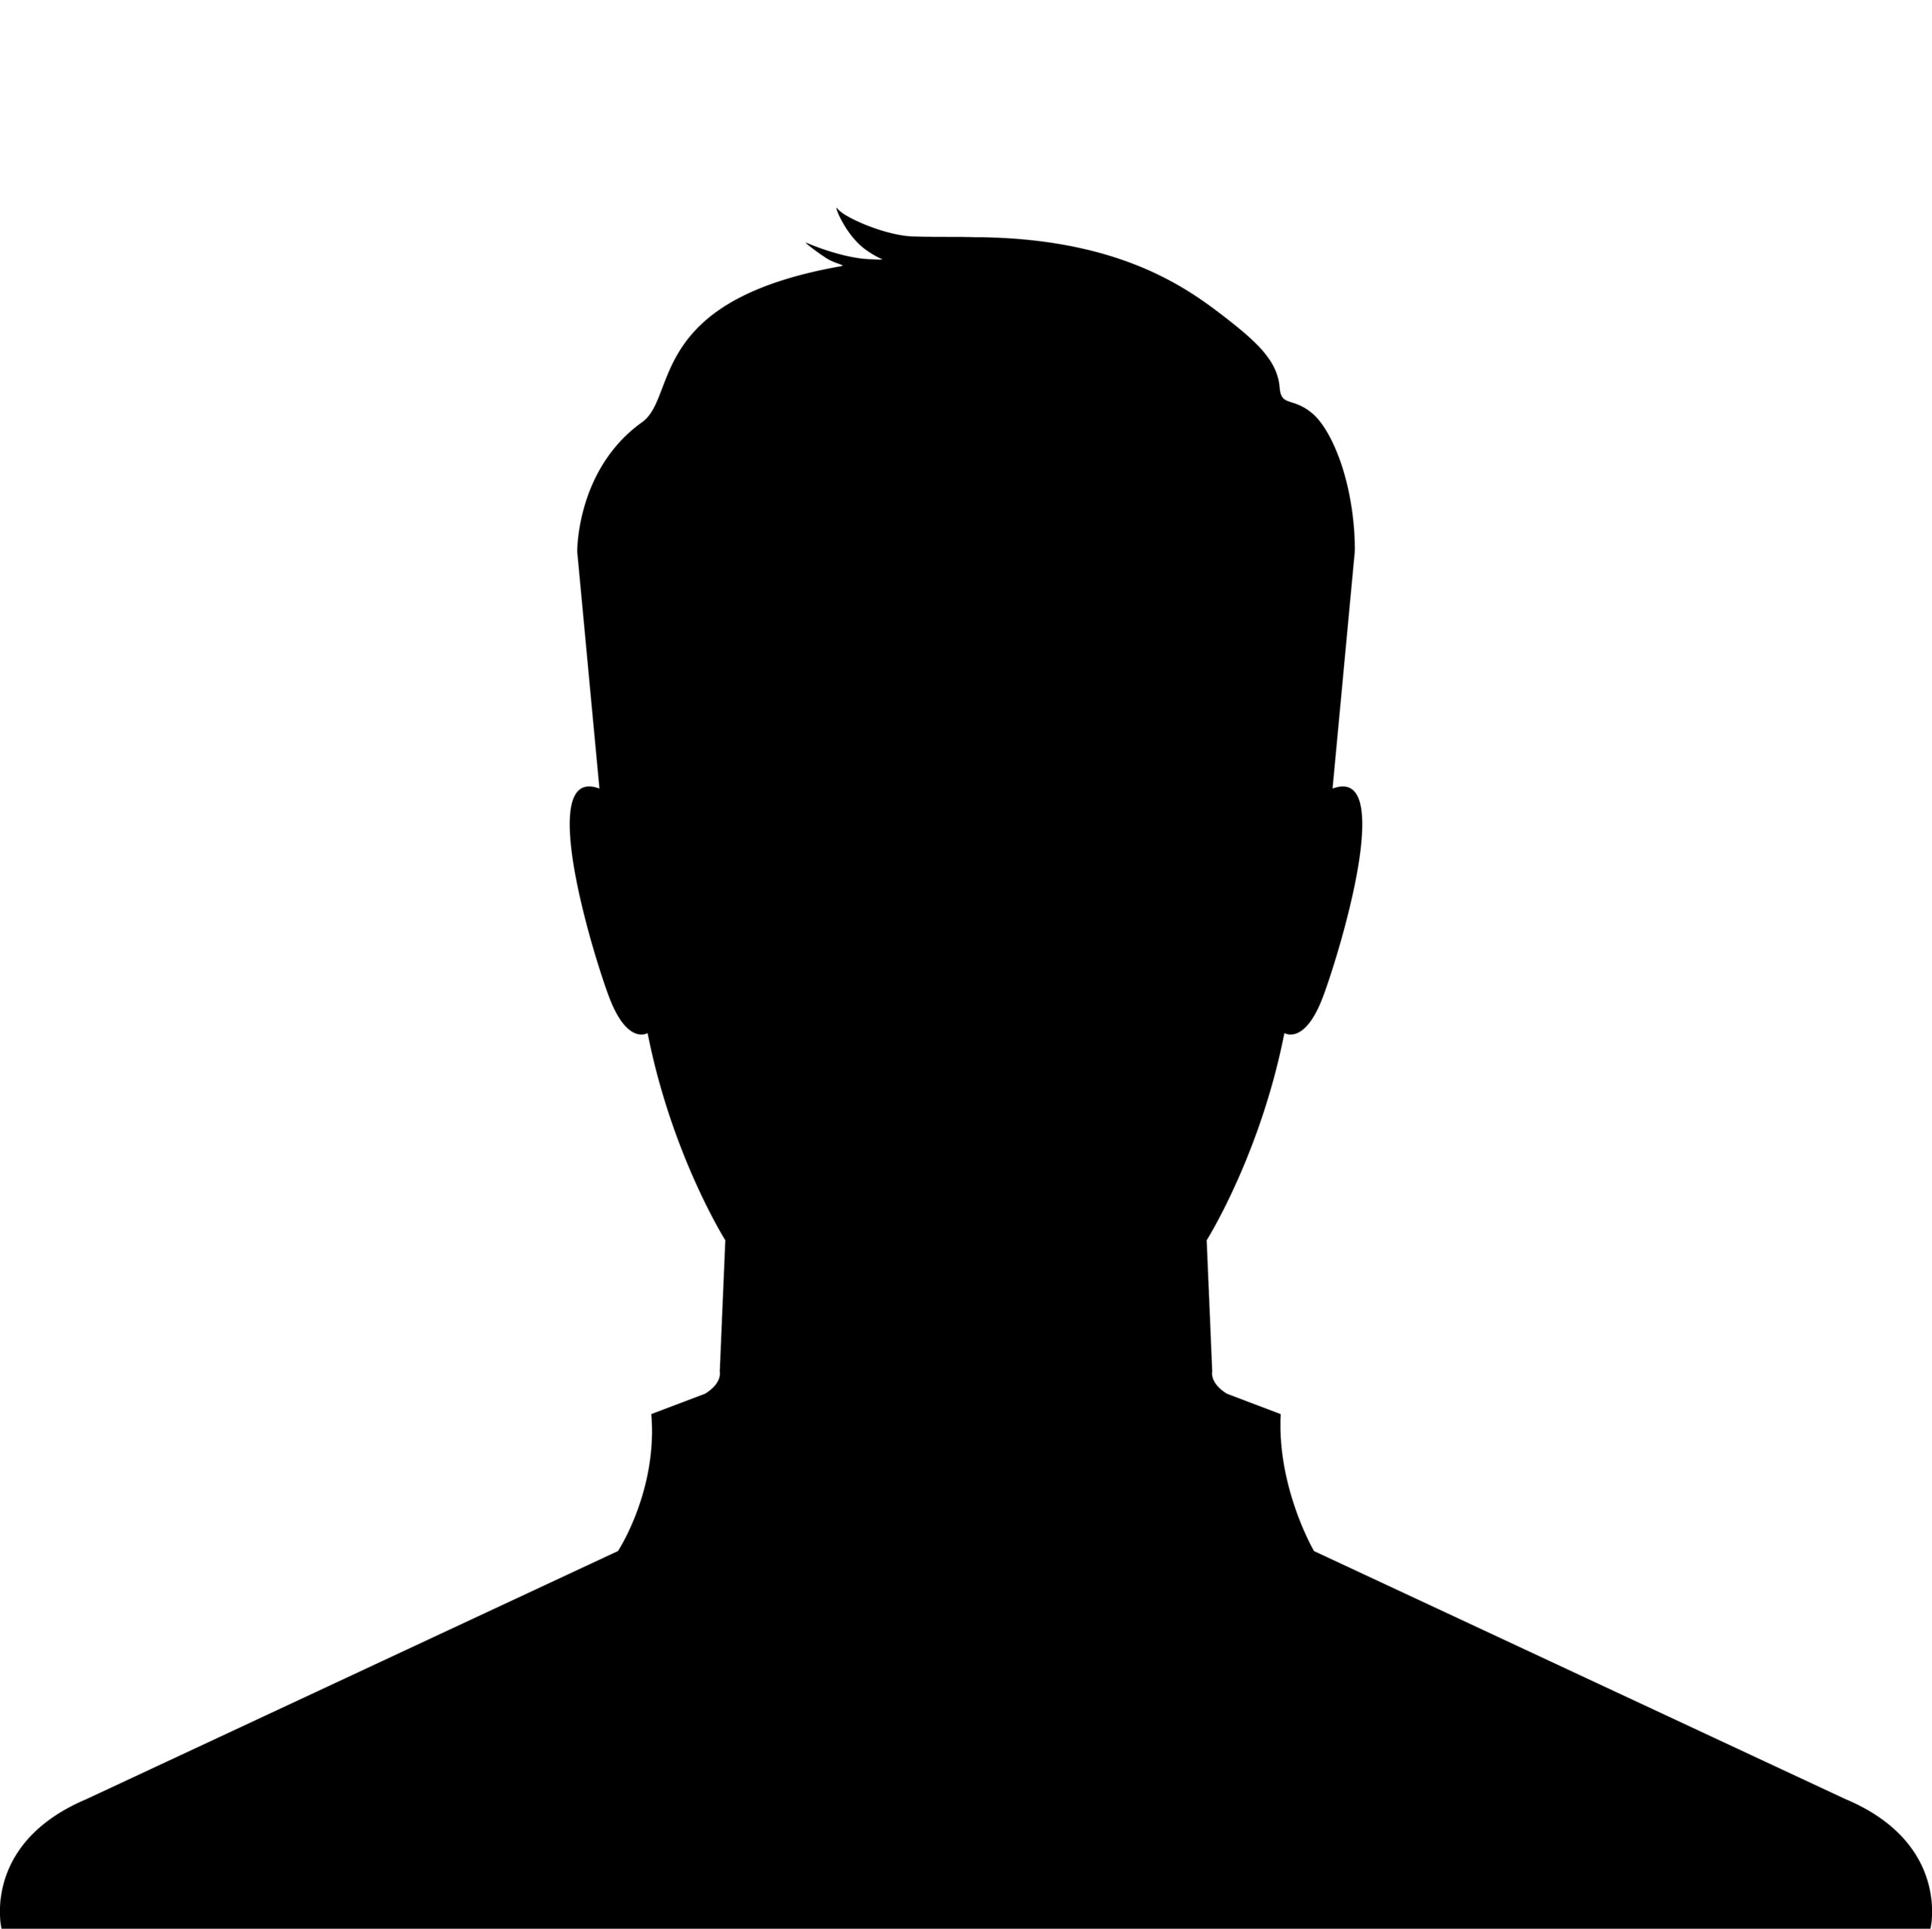 Silhouette of a male head and shoulders